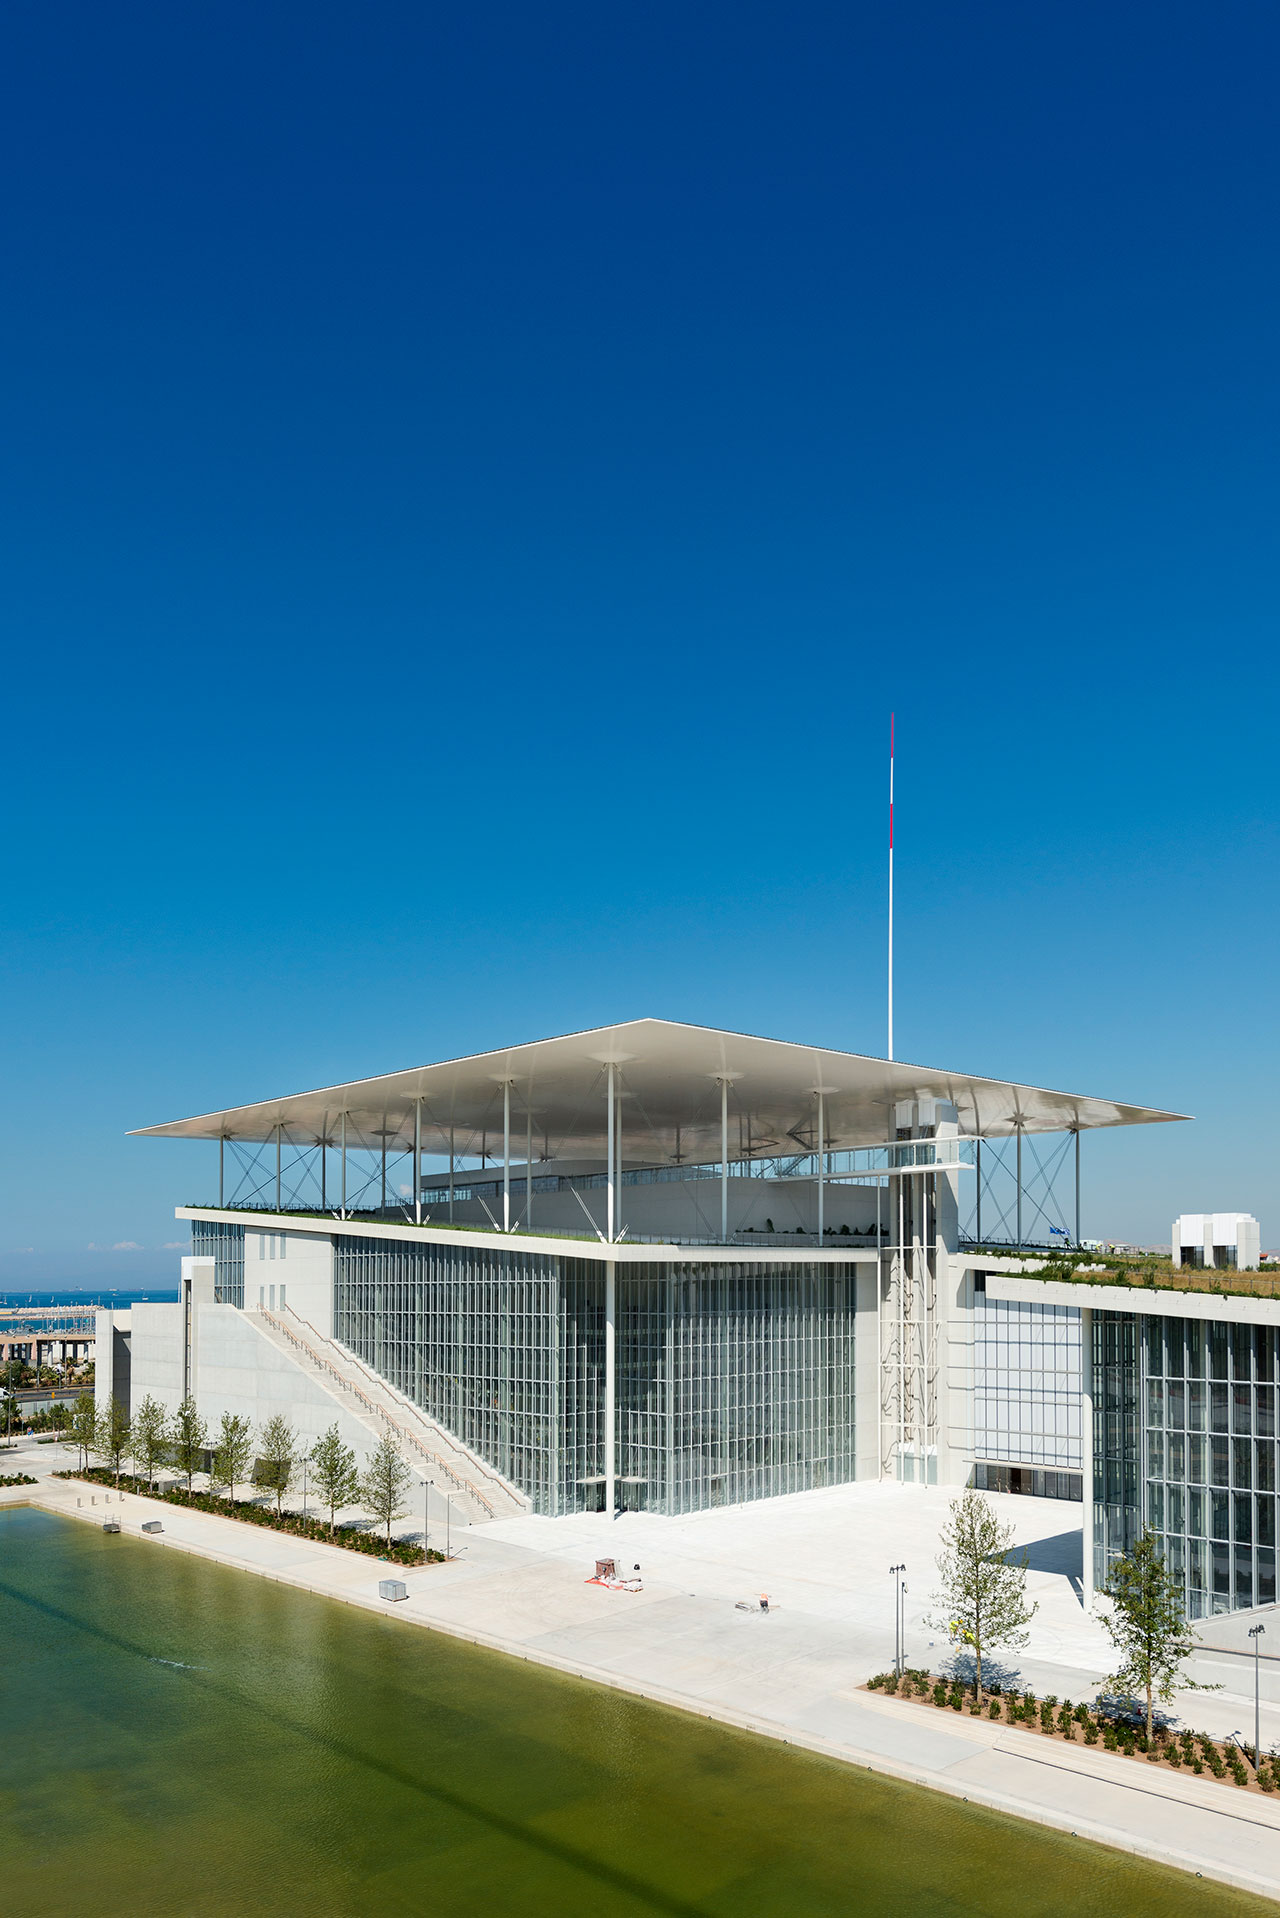 Northeast view of the SNFCC. Photo © SNFCC / Yiorgis Yerolymbos.